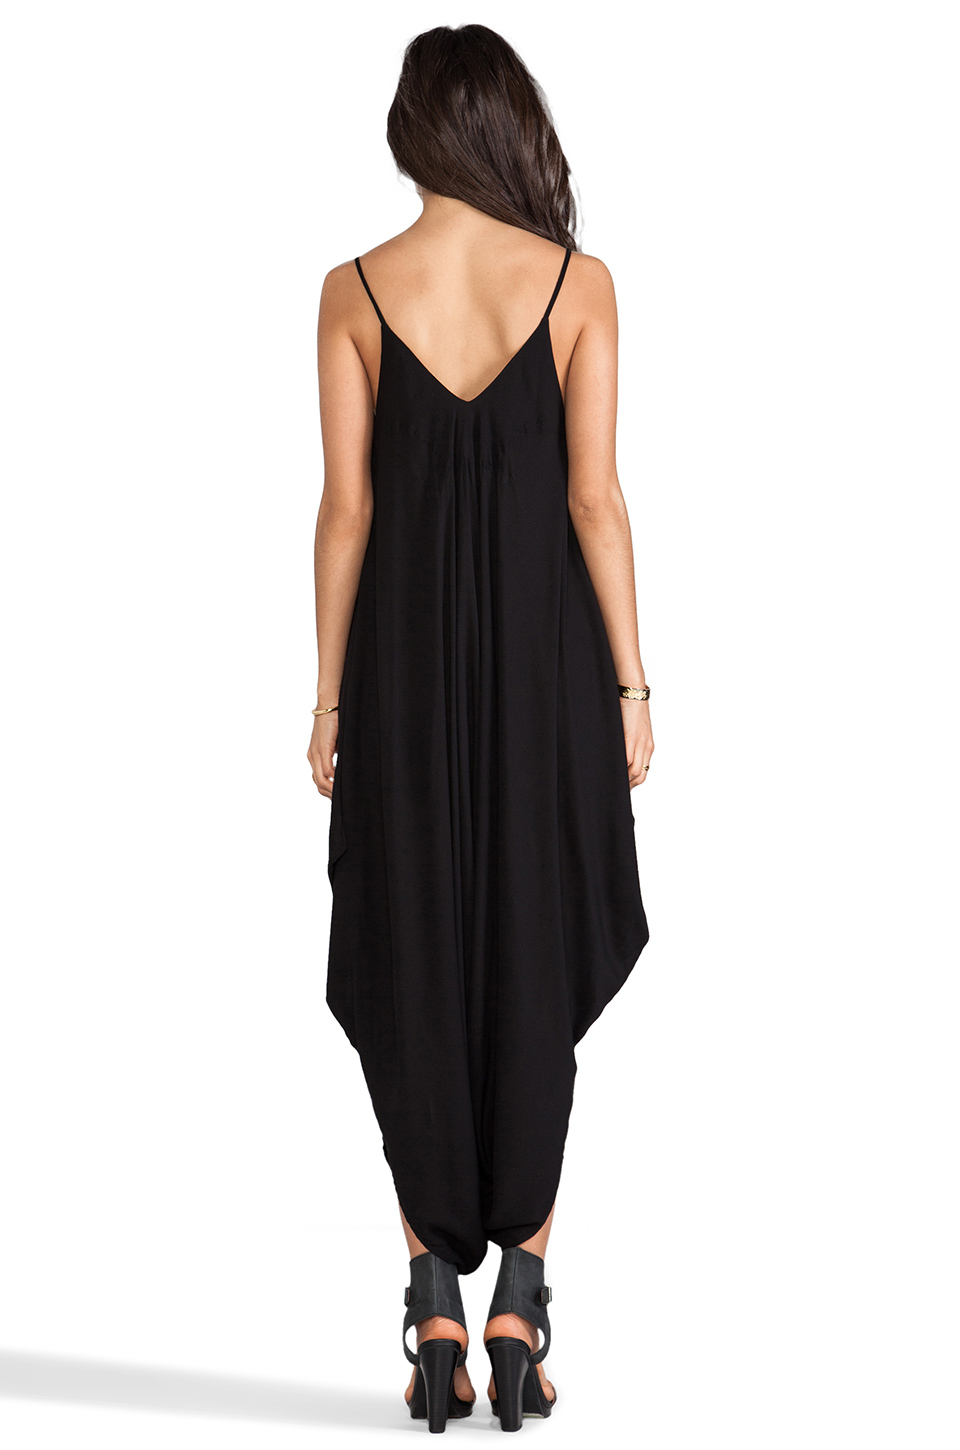 Lyst - Indah Ivory All in One Jumpsuit in Black